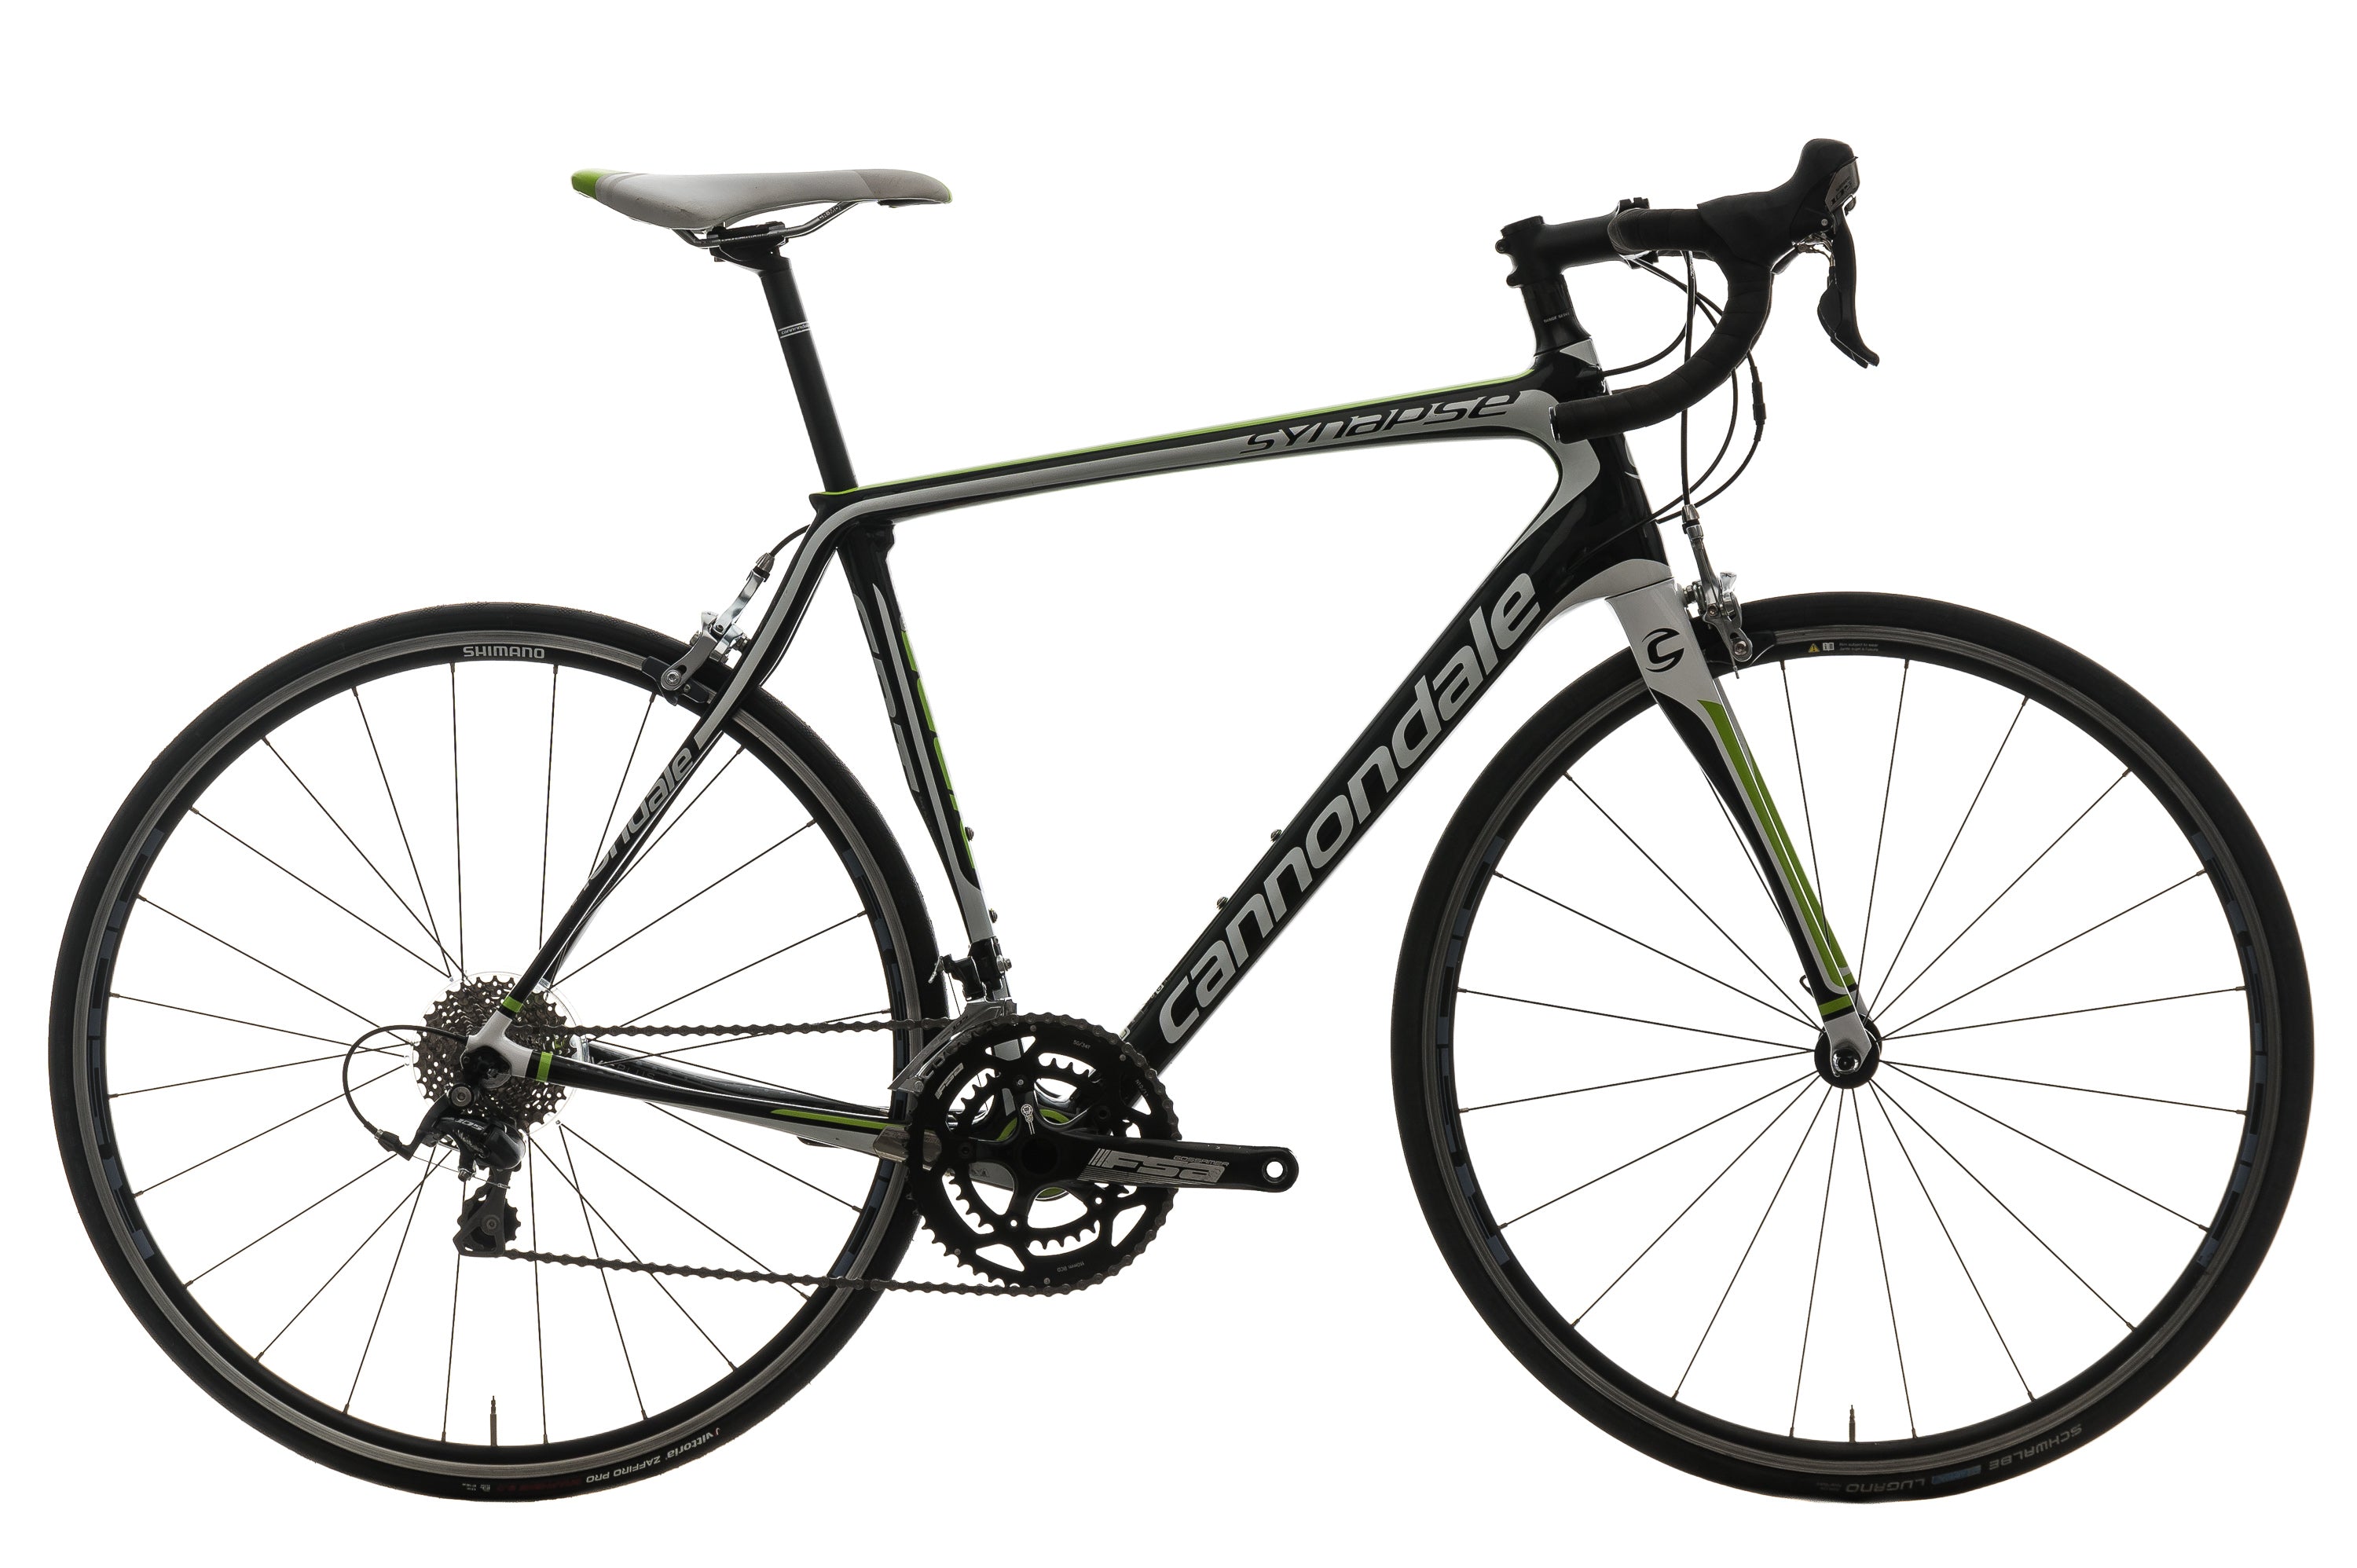 Cannondale Synapse Carbon 6 105 Road Bike - 2014 | The Pro's ...